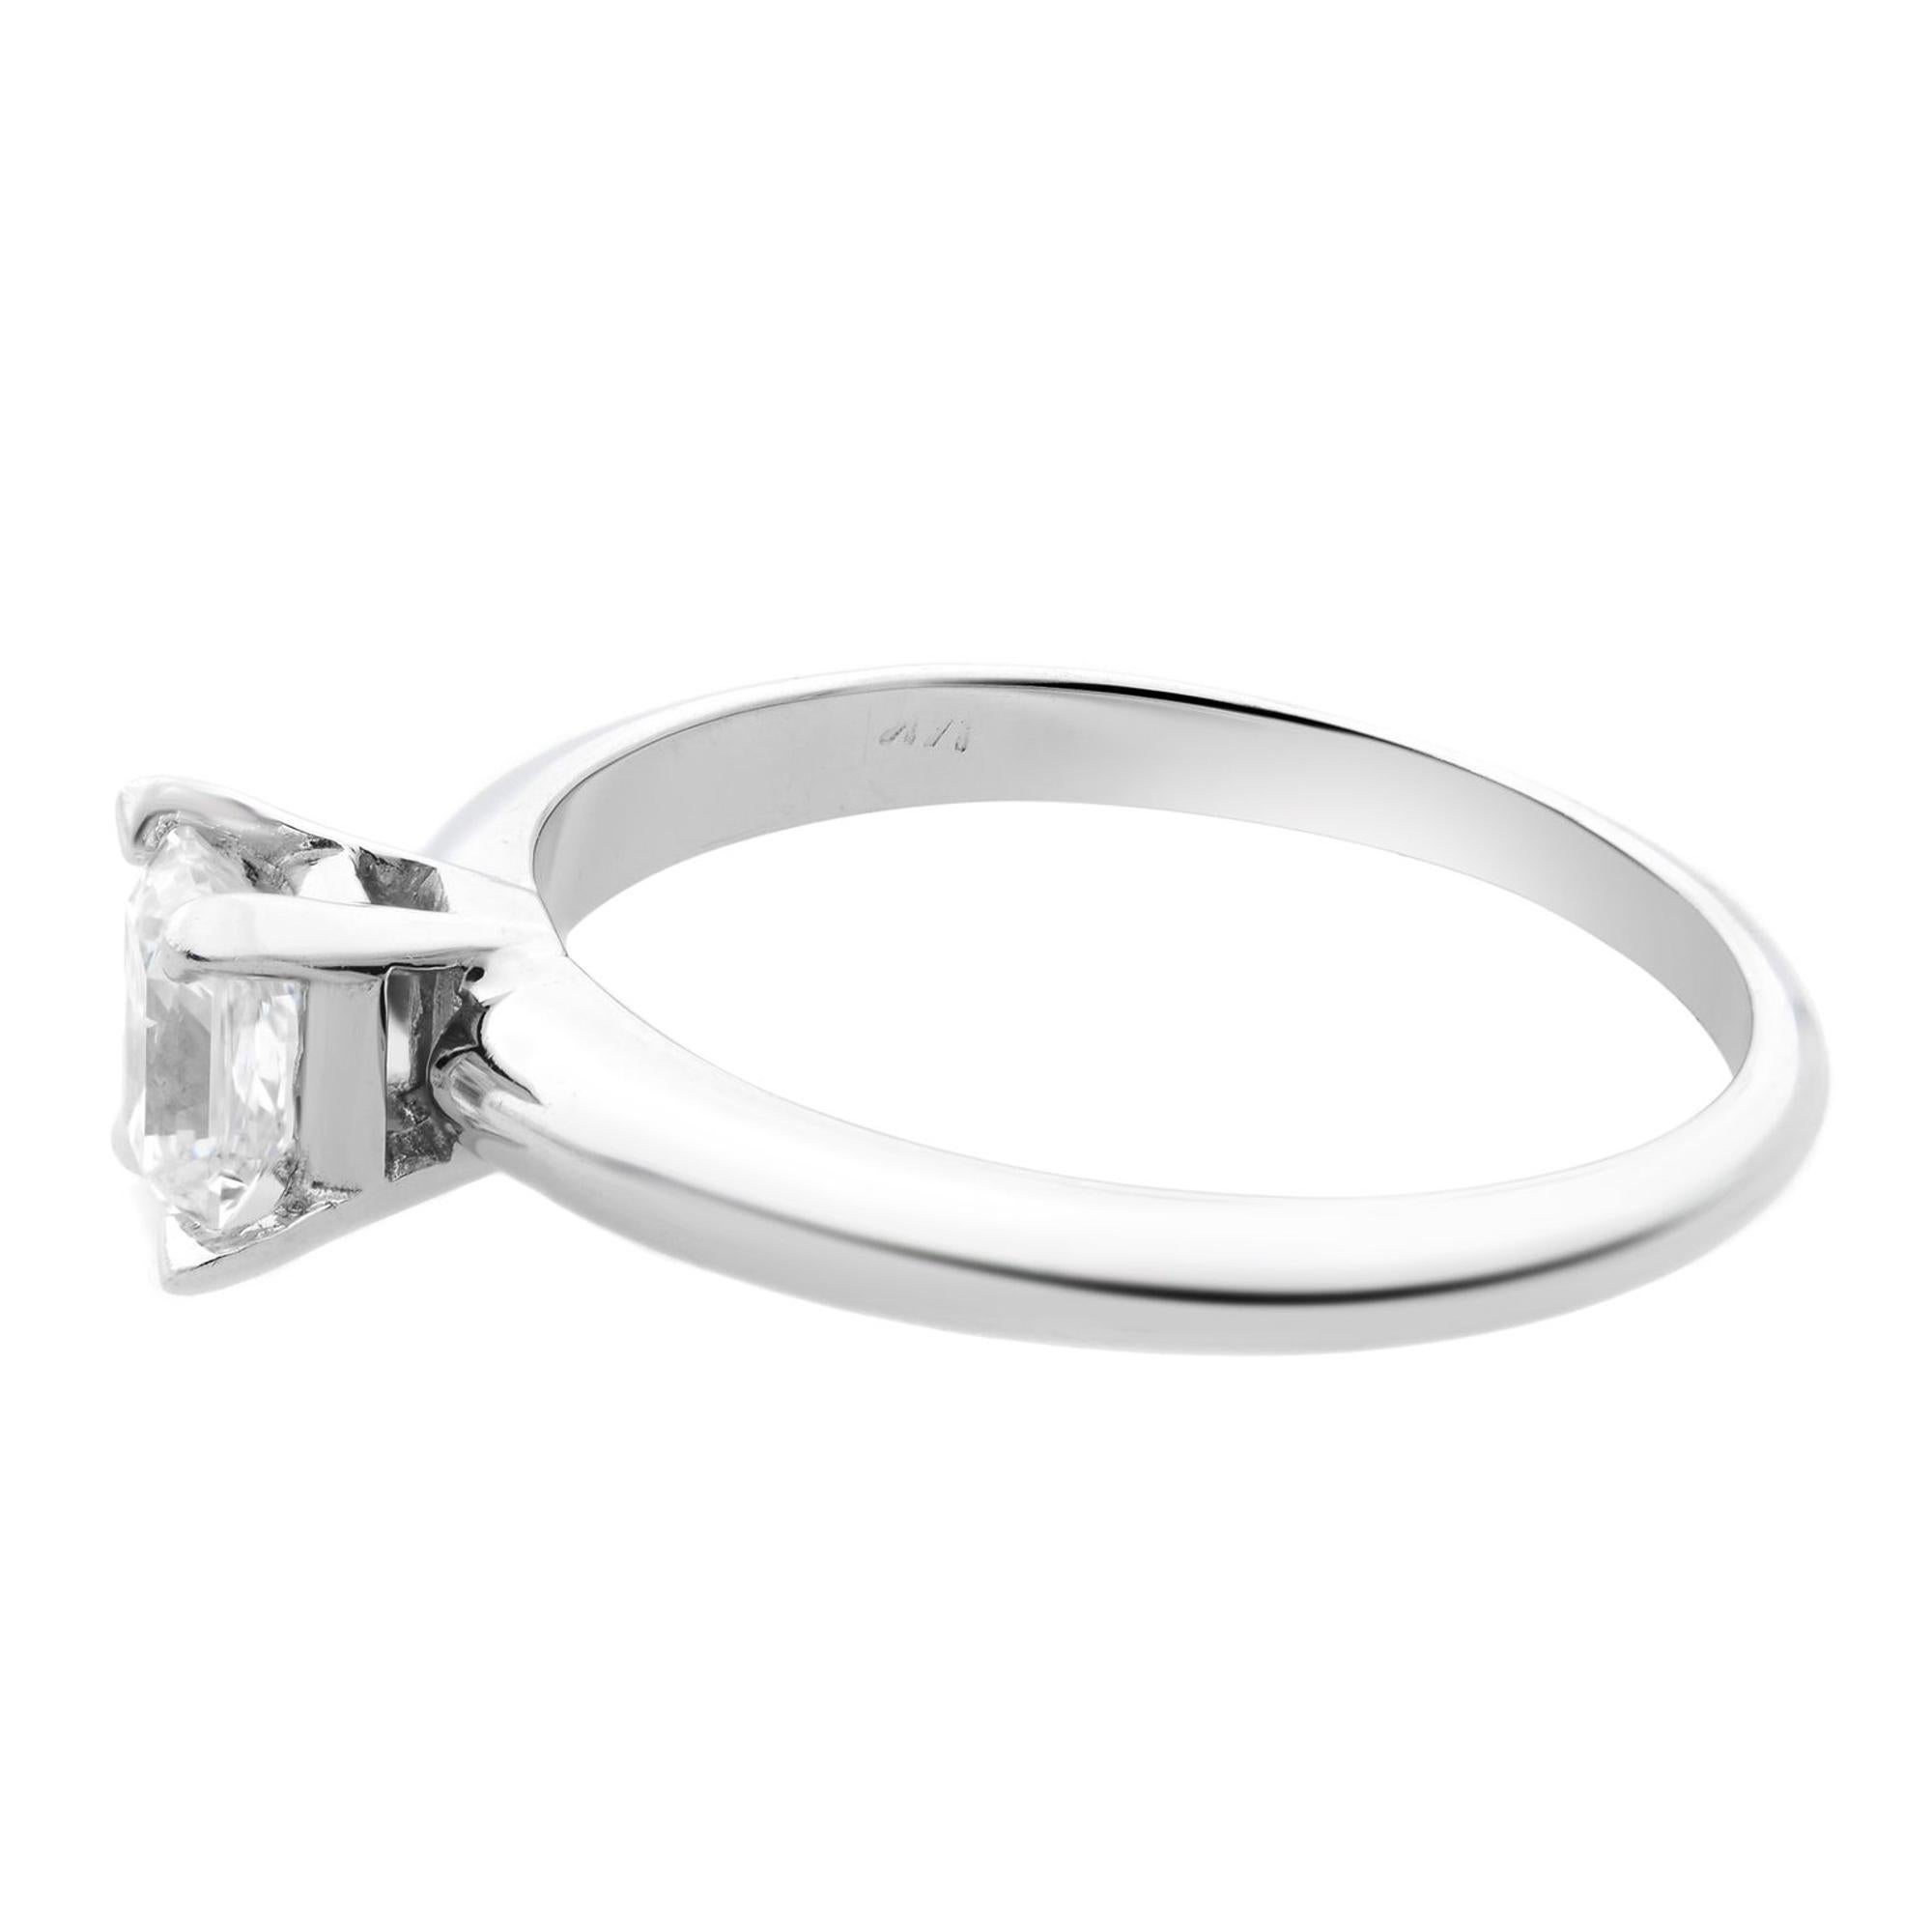 Emerald Cut Diamond Solitaire Engagement Ring 14K White Gold 0.30cttw In New Condition For Sale In New York, NY